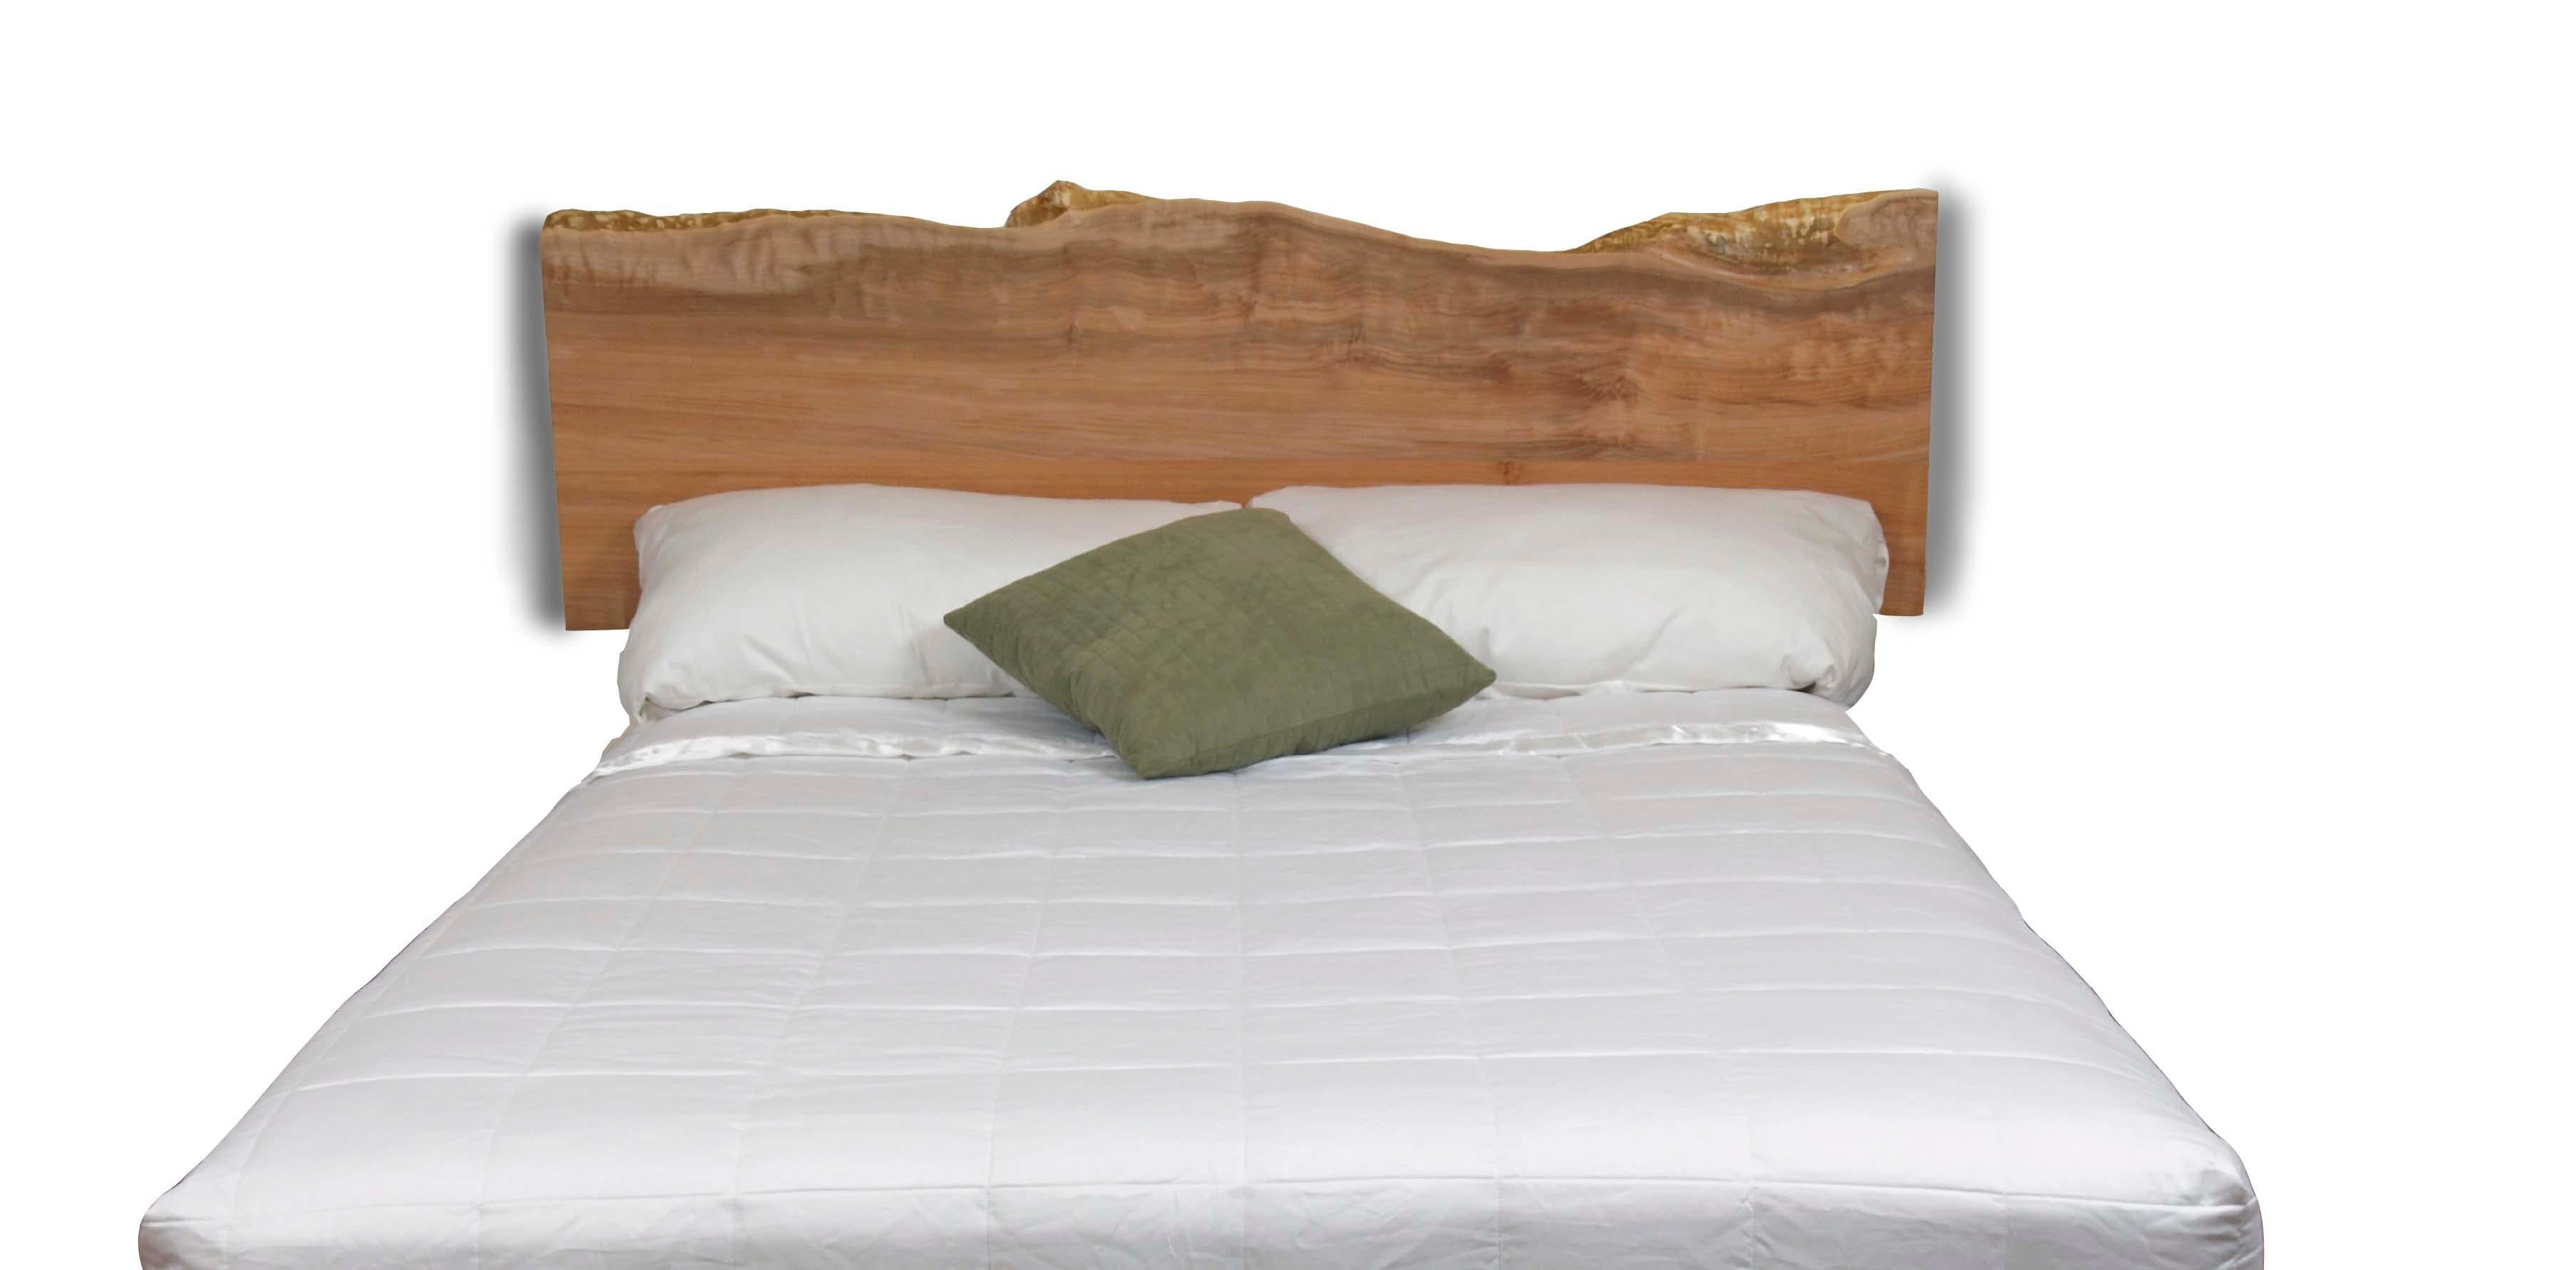 Organic Modern Live Edge Wall Hung Headboard Made From a Single Slab of Live Edge Western Maple For Sale